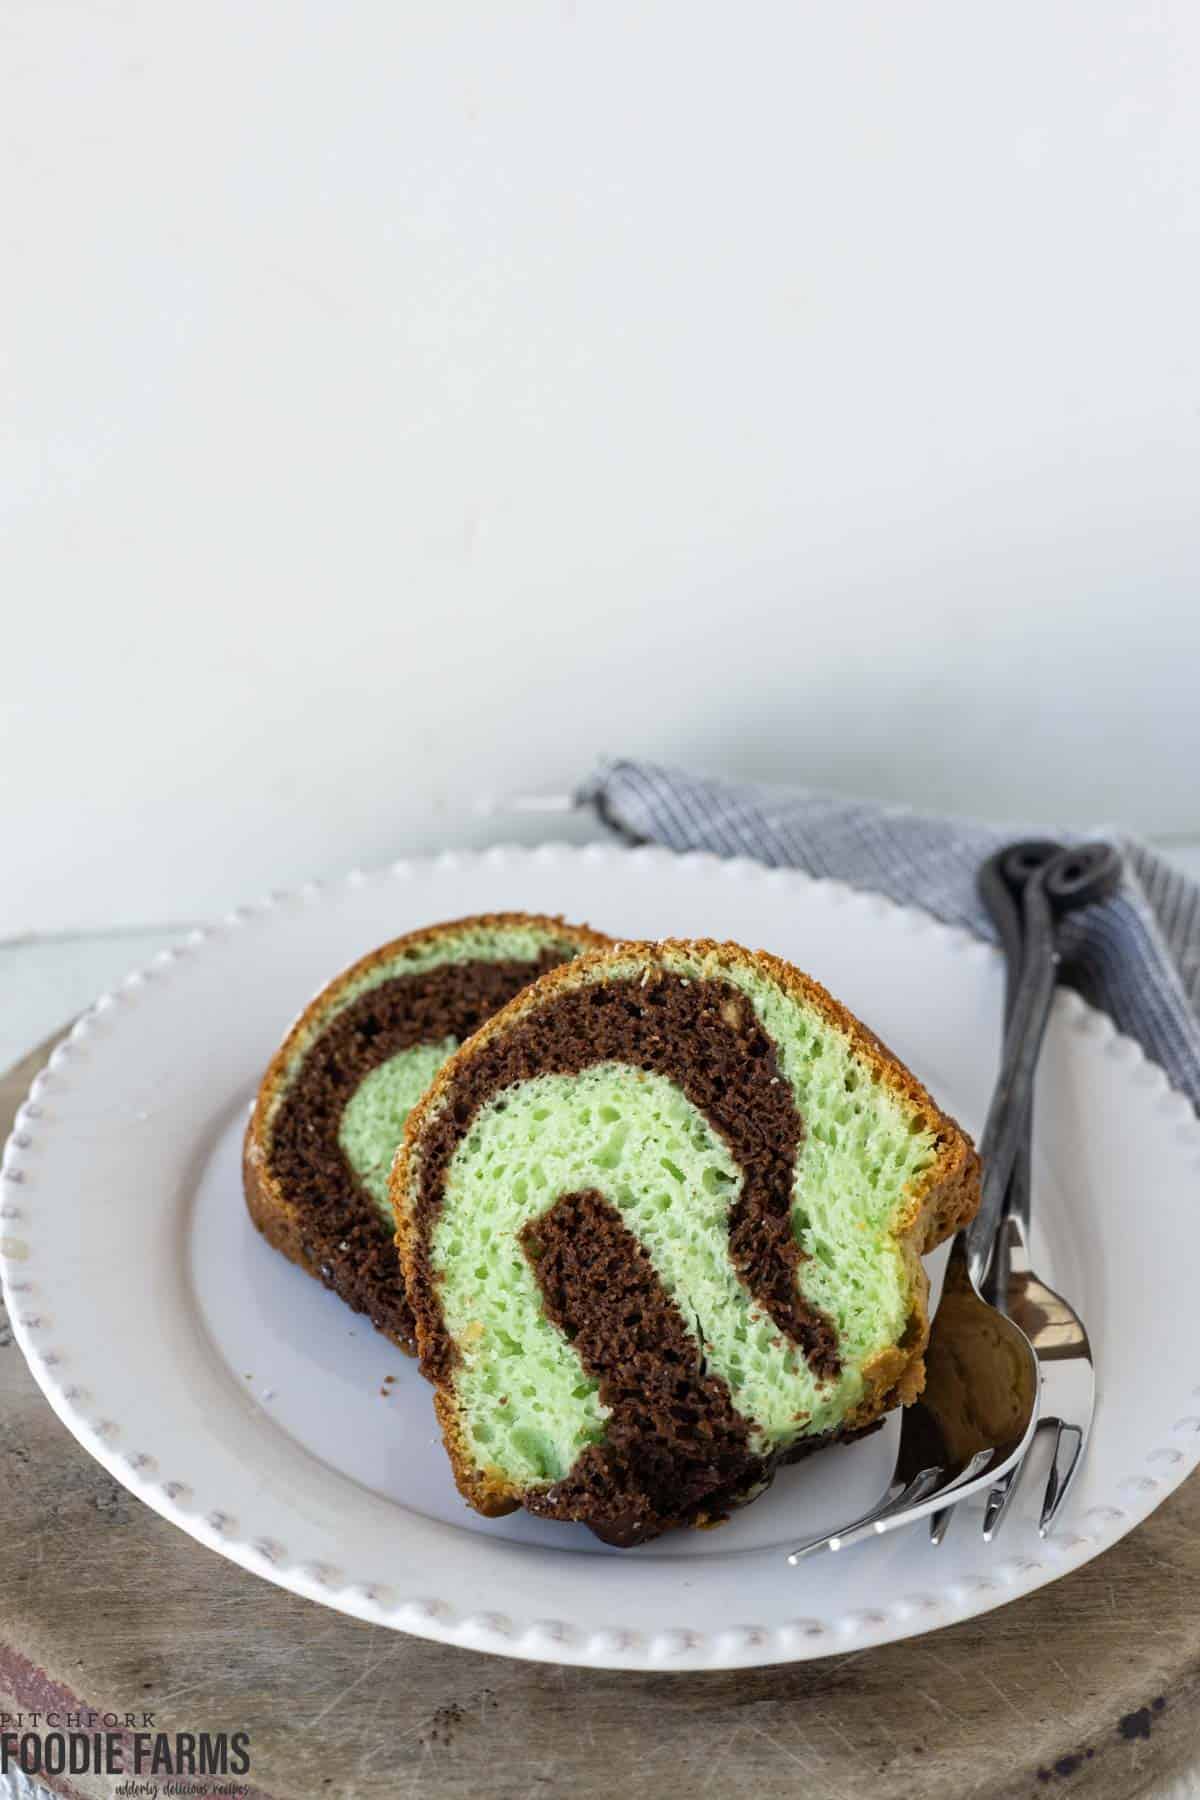 Slices of swirled chocolate and pistachio cake on a plate.